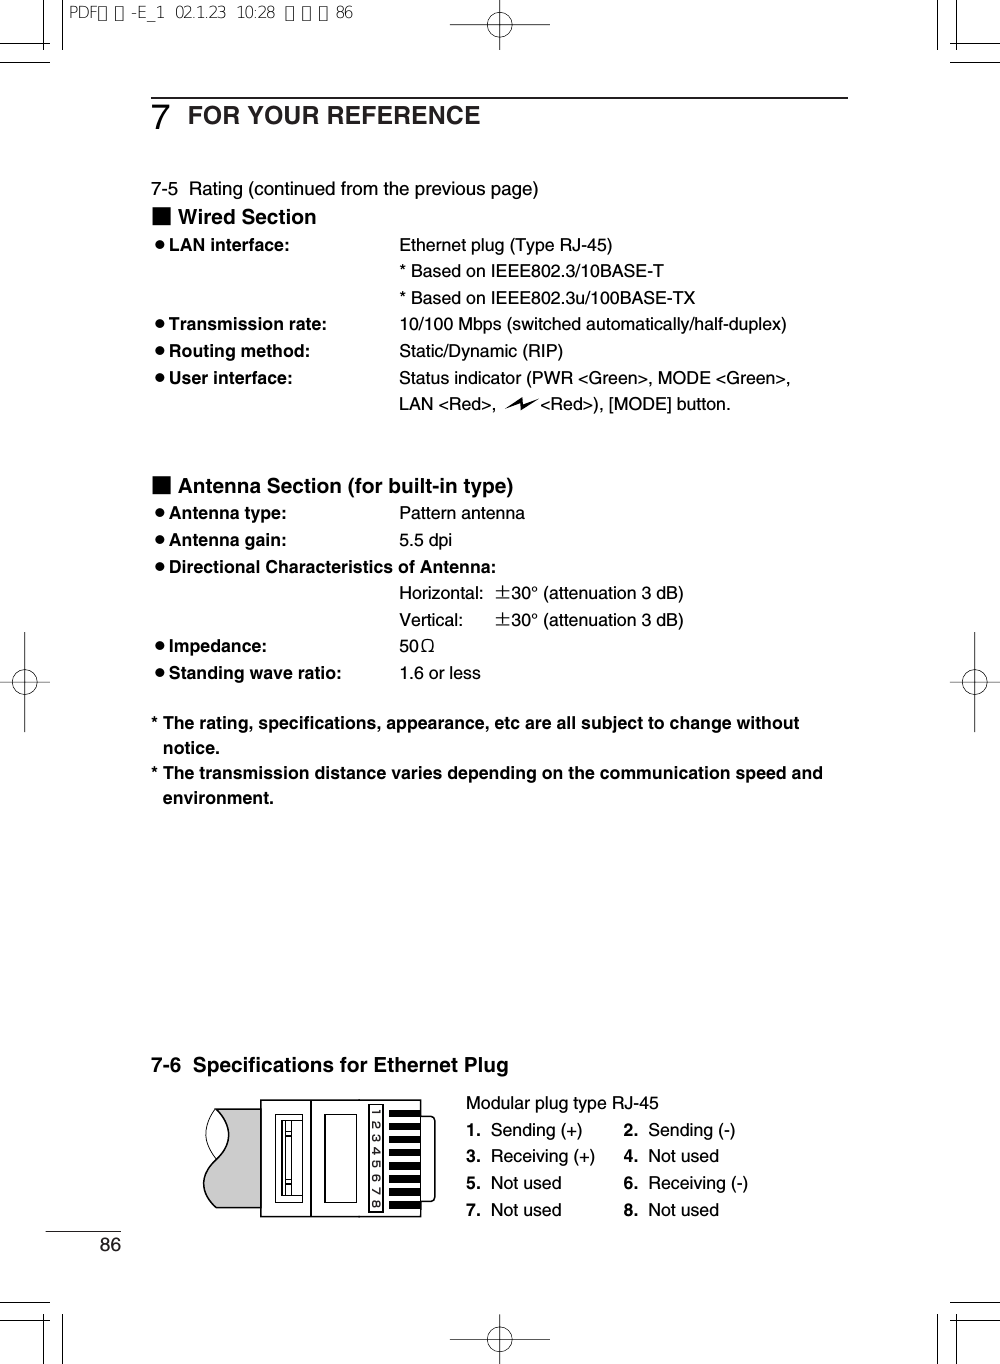 86FOR YOUR REFERENCE77-5  Rating (continued from the previous page)■Wired Section¡LAN interface: Ethernet plug (Type RJ-45)* Based on IEEE802.3/10BASE-T* Based on IEEE802.3u/100BASE-TX¡Transmission rate: 10/100 Mbps (switched automatically/half-duplex)¡Routing method: Static/Dynamic (RIP)¡User interface: Status indicator (PWR &lt;Green&gt;, MODE &lt;Green&gt;, LAN &lt;Red&gt;,  &lt;Red&gt;), [MODE] button.■Antenna Section (for built-in type)¡Antenna type: Pattern antenna¡Antenna gain: 5.5 dpi¡Directional Characteristics of Antenna:Horizontal: ±30°(attenuation 3 dB)Vertical: ±30°(attenuation 3 dB)¡Impedance: 50Ω¡Standing wave ratio: 1.6 or less* The rating, specifications, appearance, etc are all subject to change withoutnotice.* The transmission distance varies depending on the communication speed andenvironment.7-6  Specifications for Ethernet PlugModular plug type RJ-451. Sending (+) 2. Sending (-)3. Receiving (+) 4. Not used5. Not used 6. Receiving (-)7. Not used 8. Not used12345678PDF取説-E_1  02.1.23  10:28  ページ86